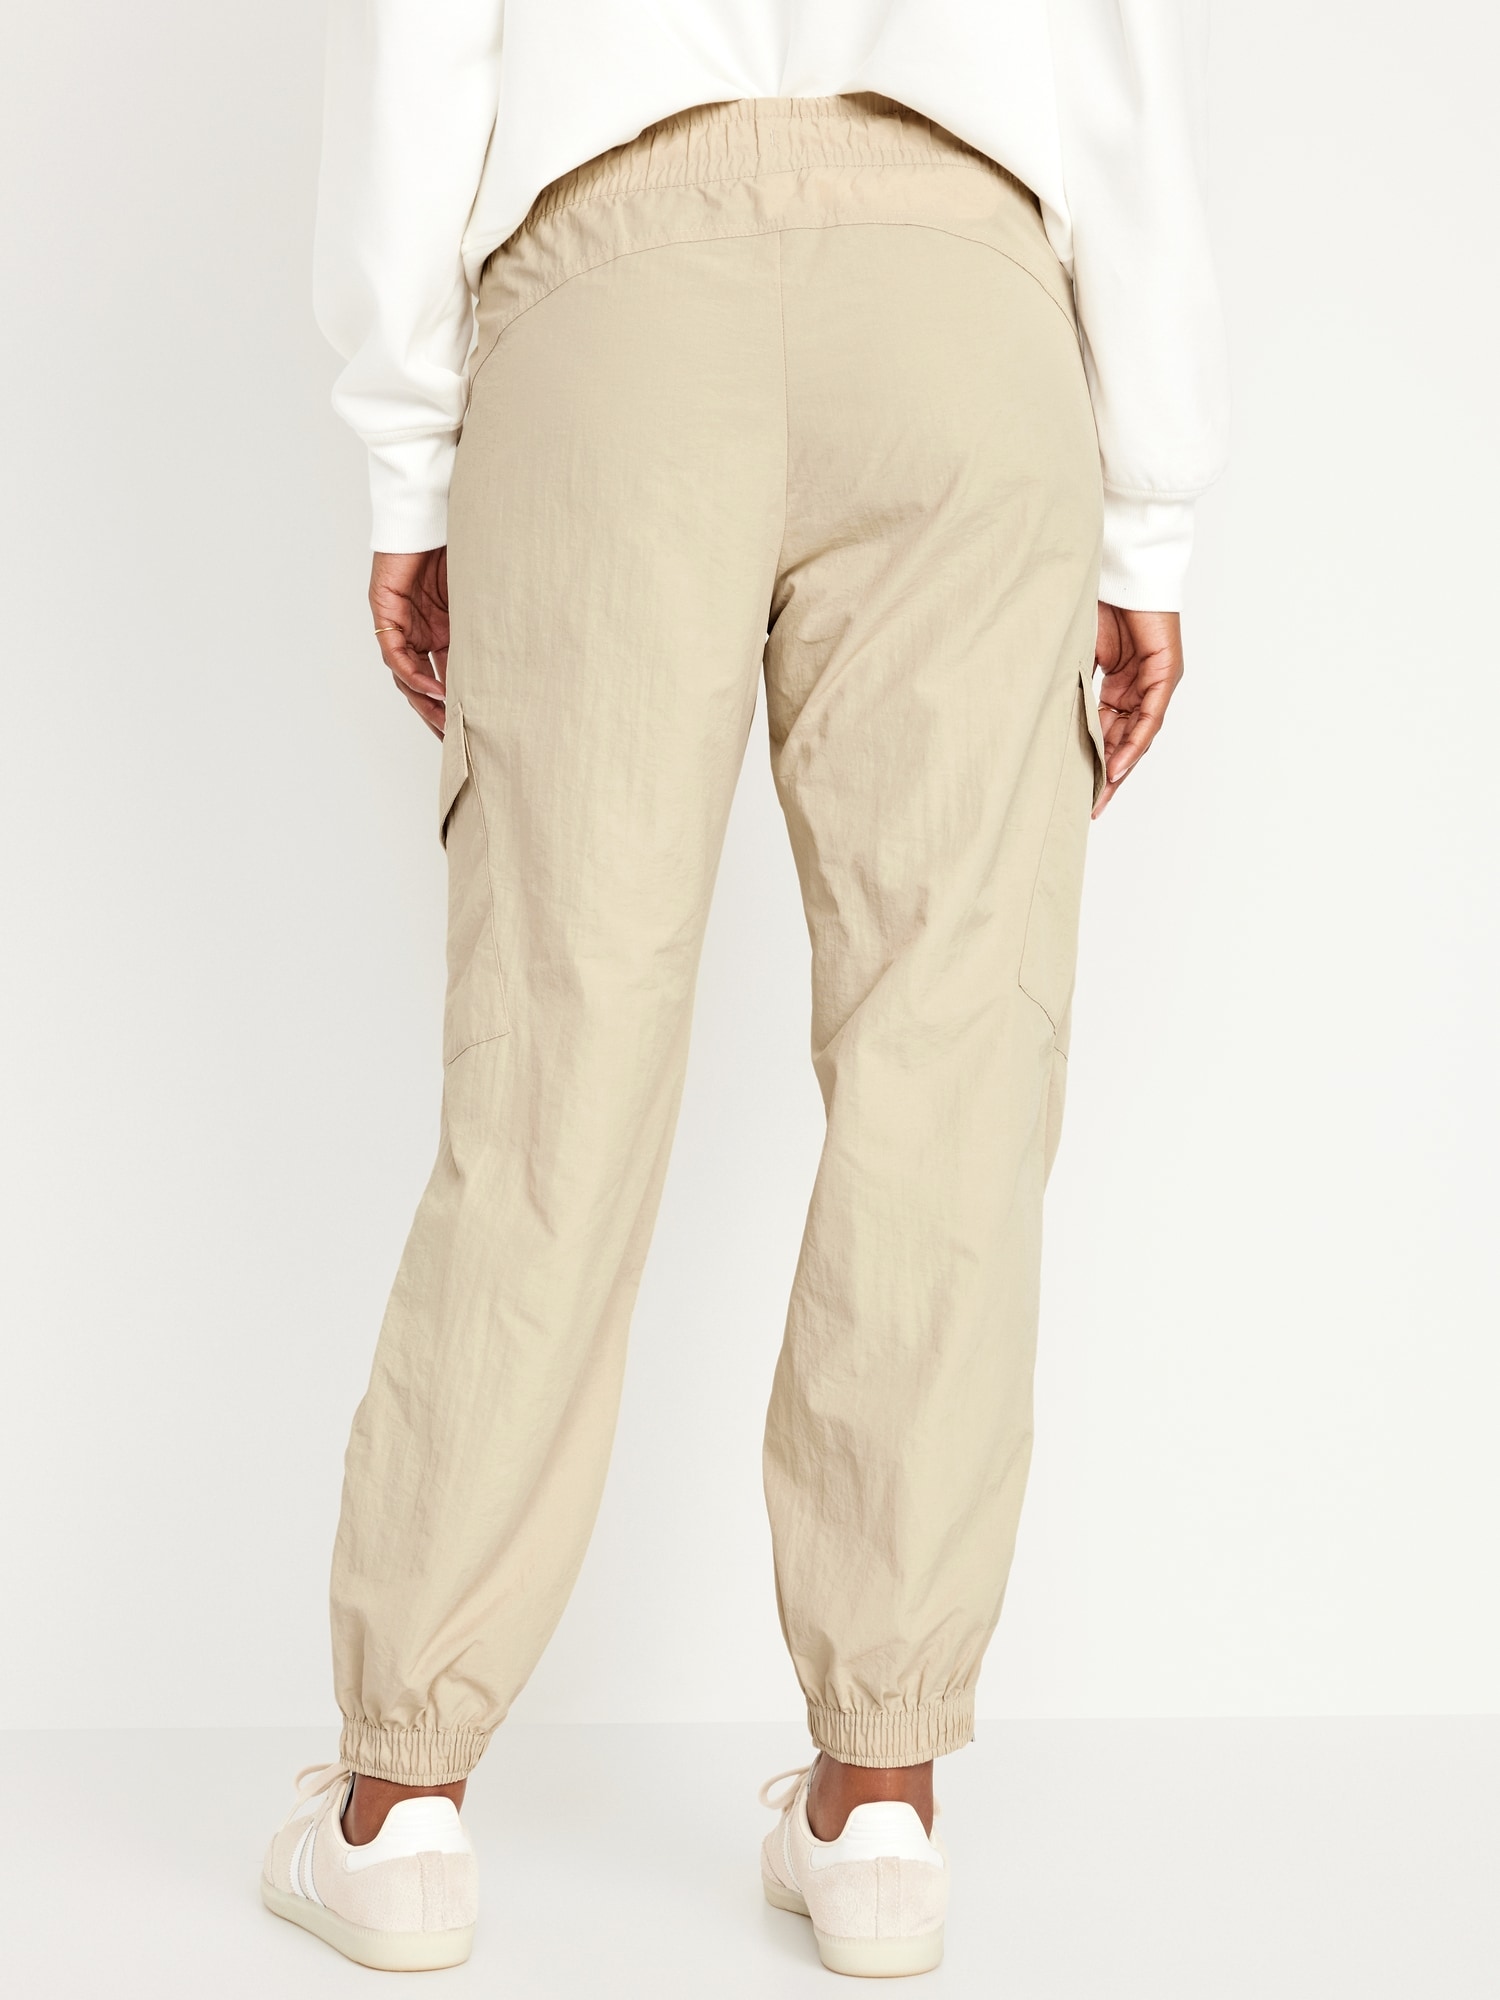 Womens High Waisted Woven Cargo Jogger - Beige - L, Khaki Pants Outfit  Women Casual